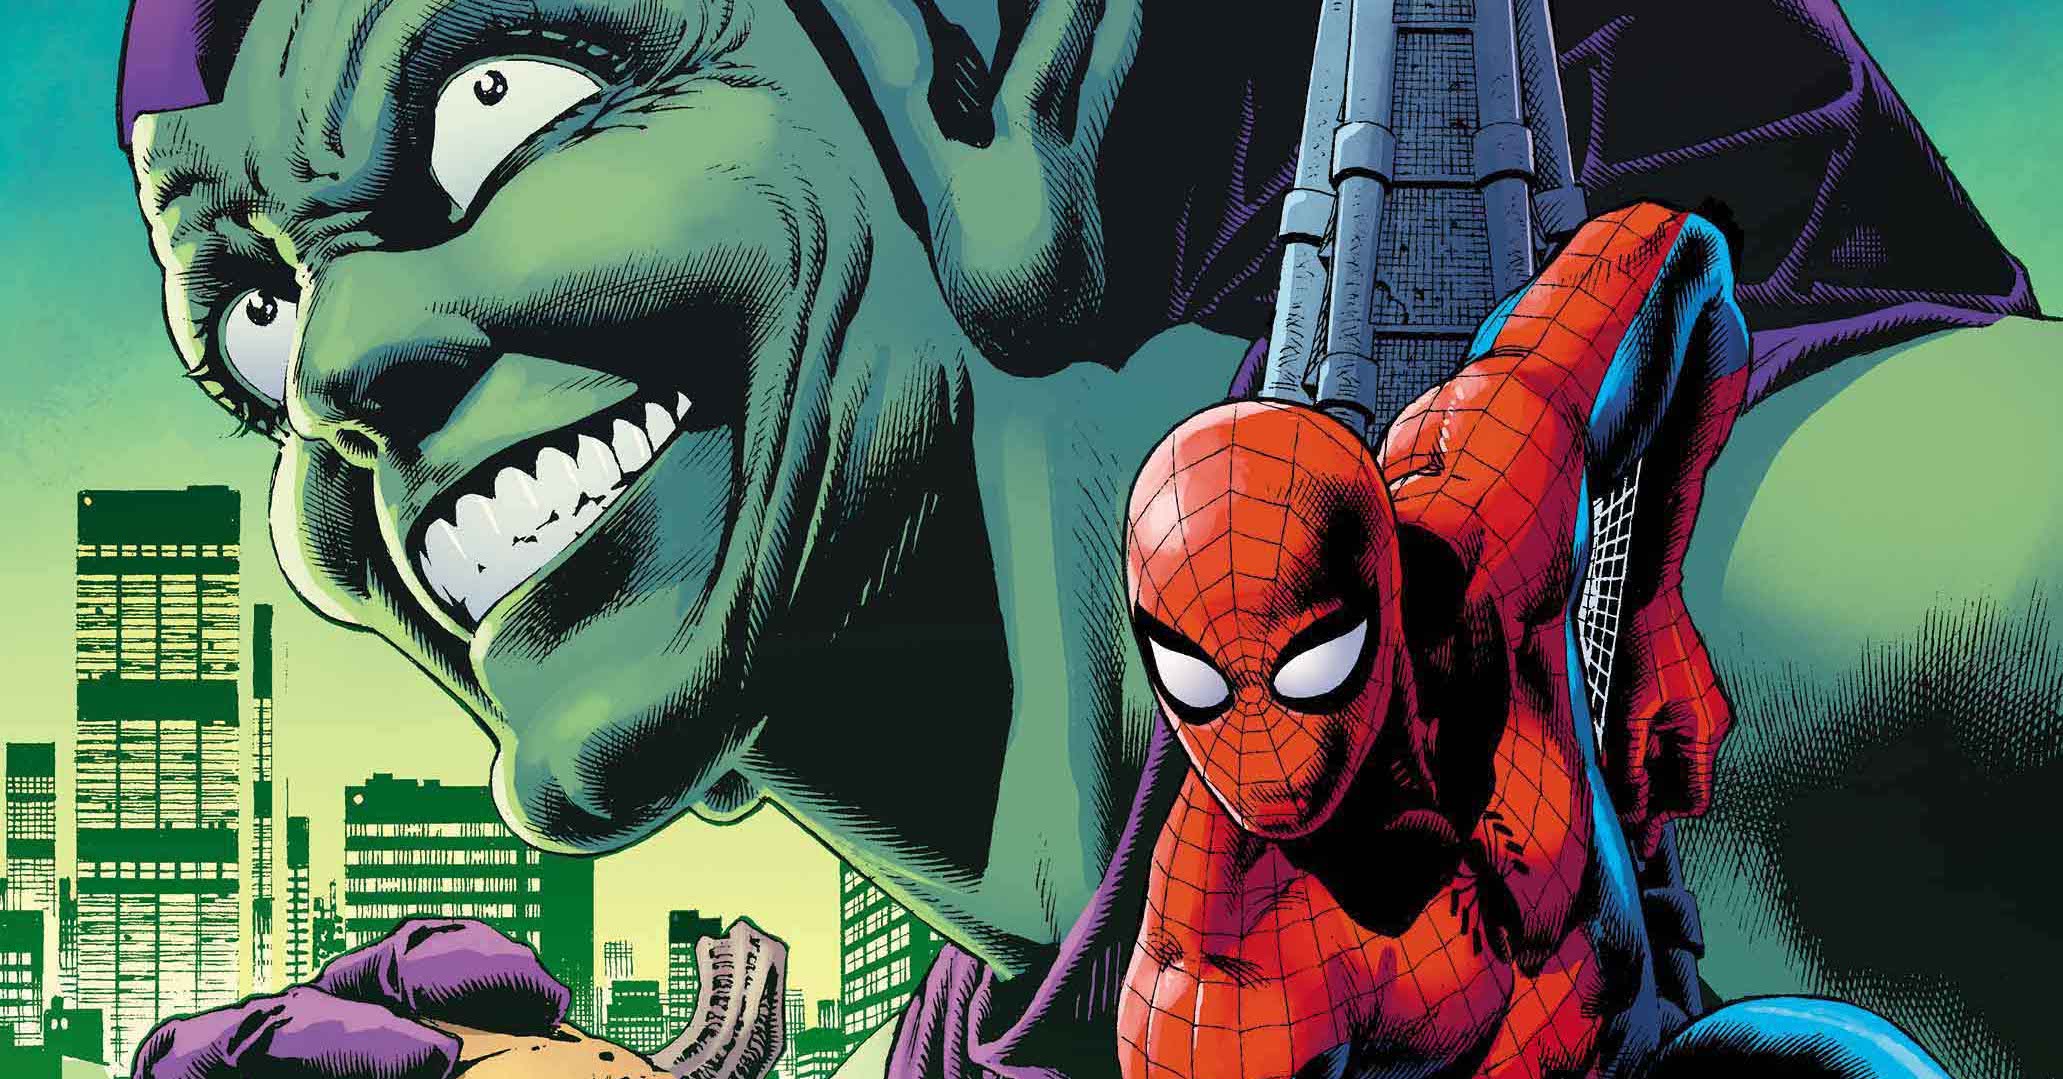 'Spider-Man: Shadow of the Green Goblin' #1 adds interesting new canon